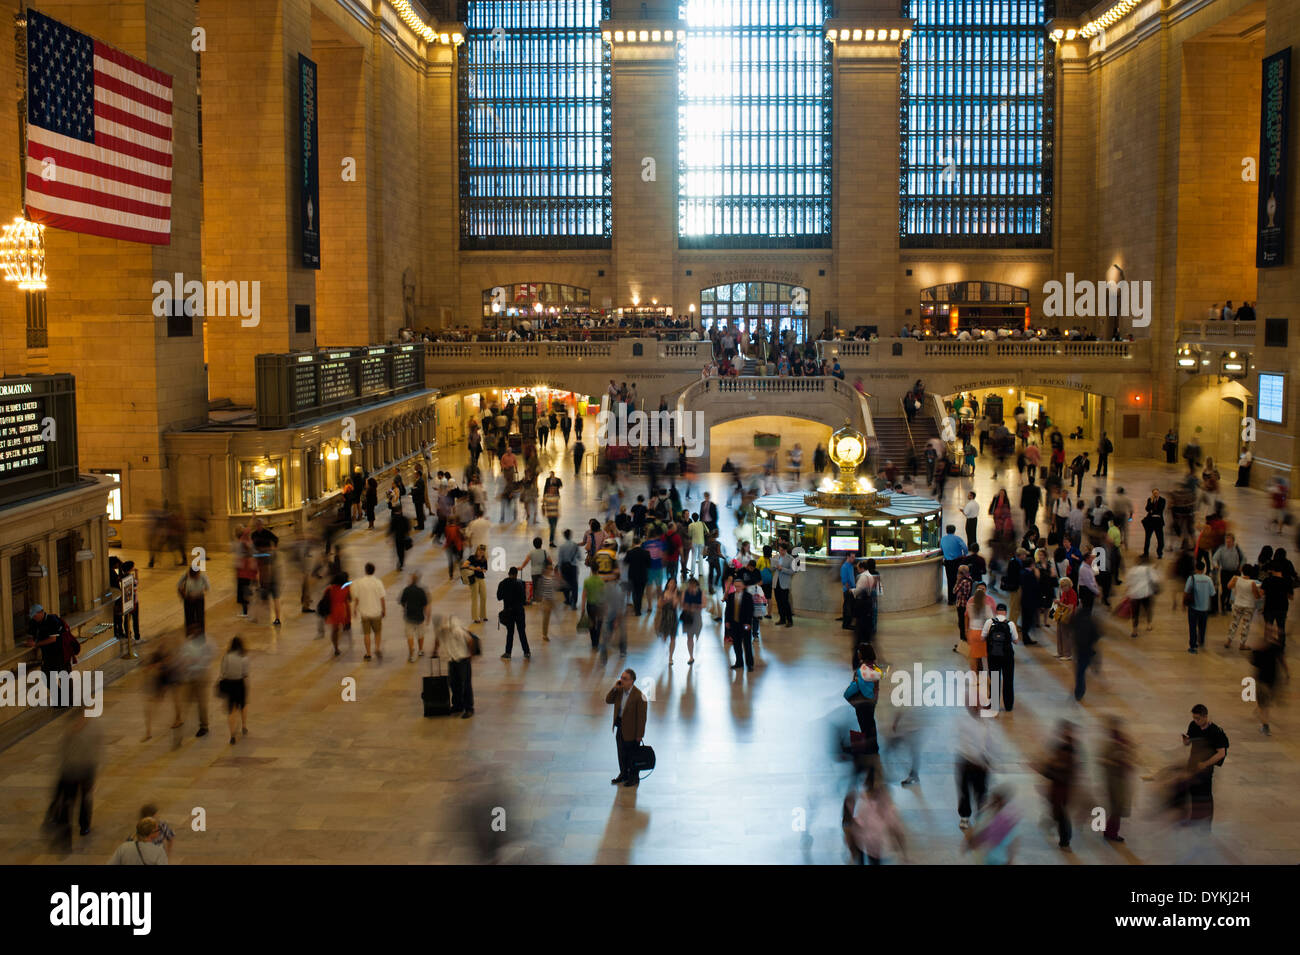 People / travelers in Grand Central Station, New York City Stock Photo